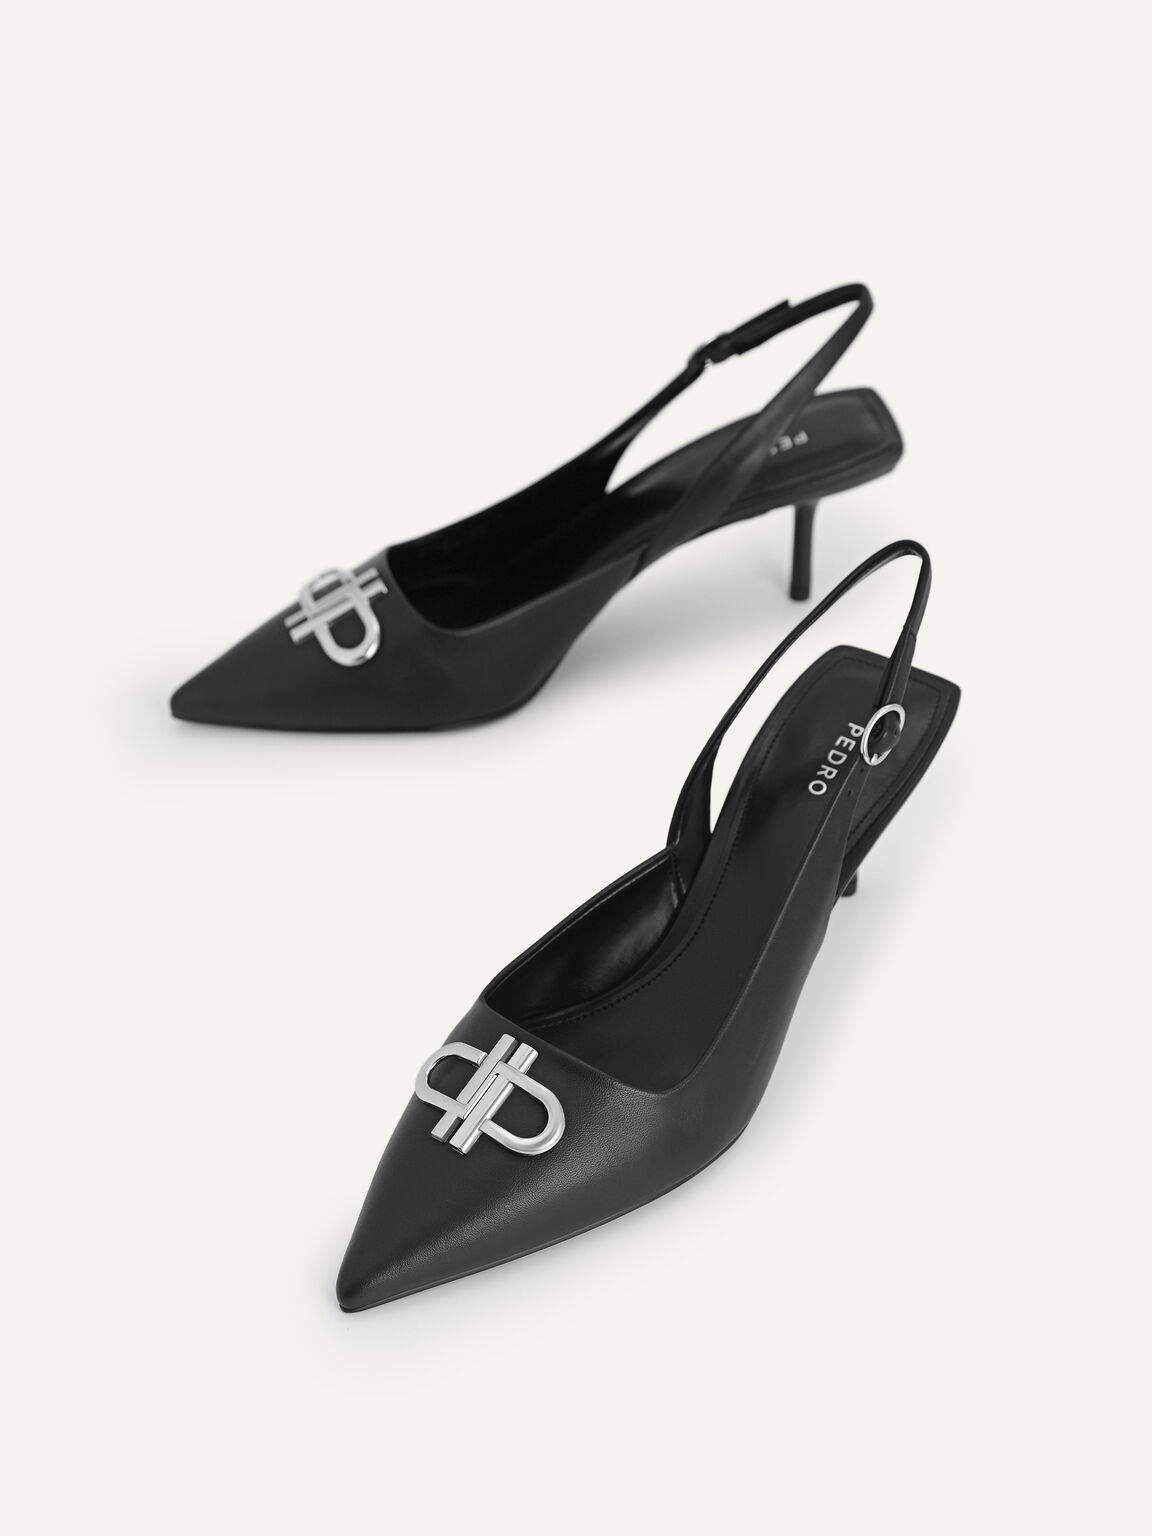 Icon Leather Pointed Toe Slingback Heels, Black